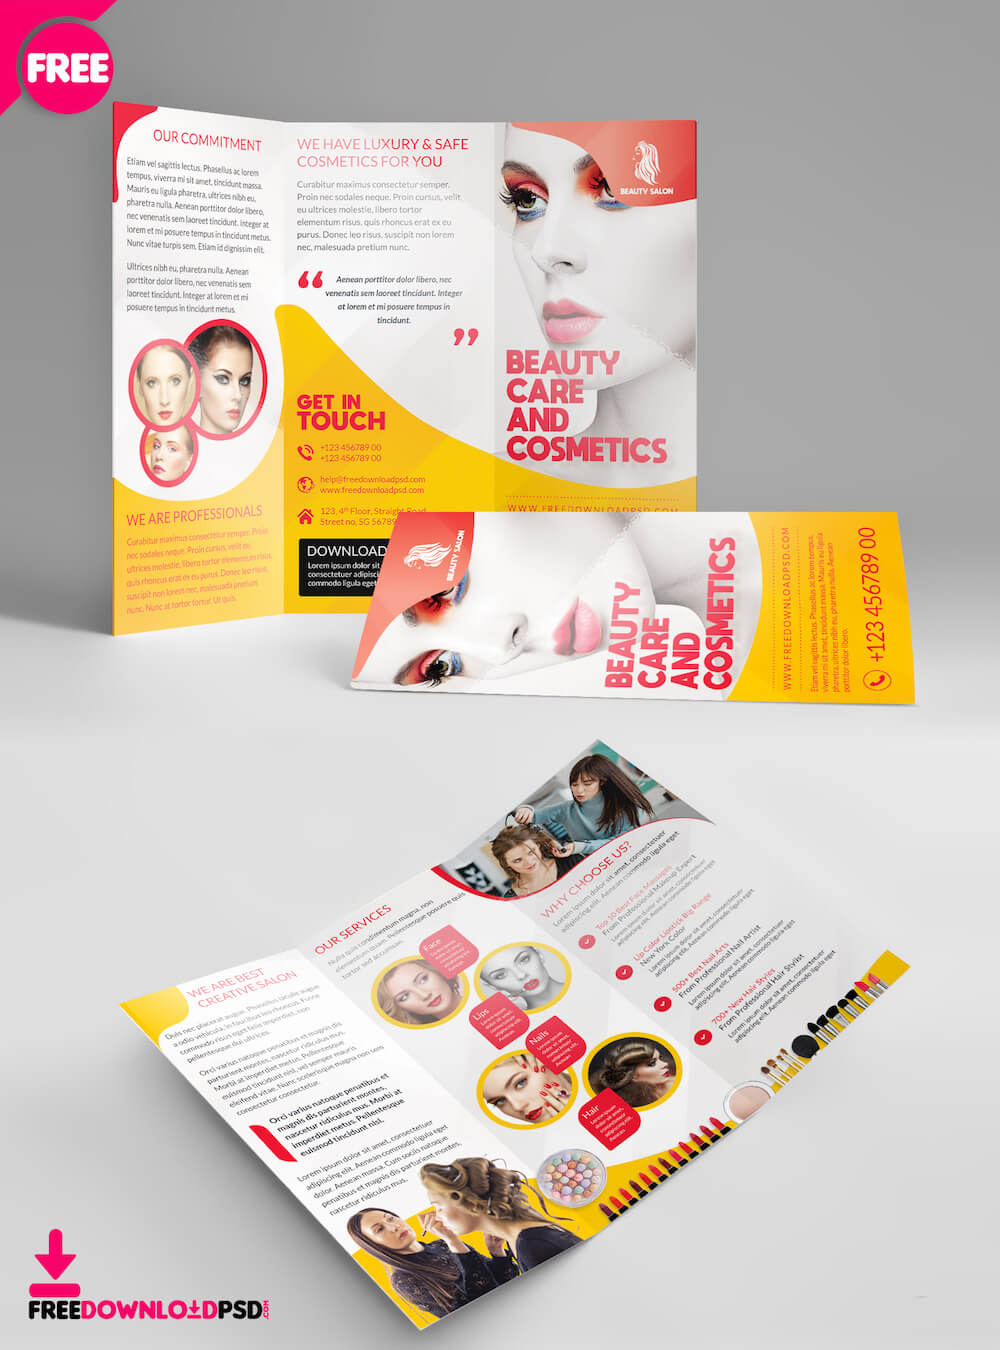 29 Best Free Brochure Mockups & Psd Templates 2019 – Colorlib Throughout 2 Fold Brochure Template Free